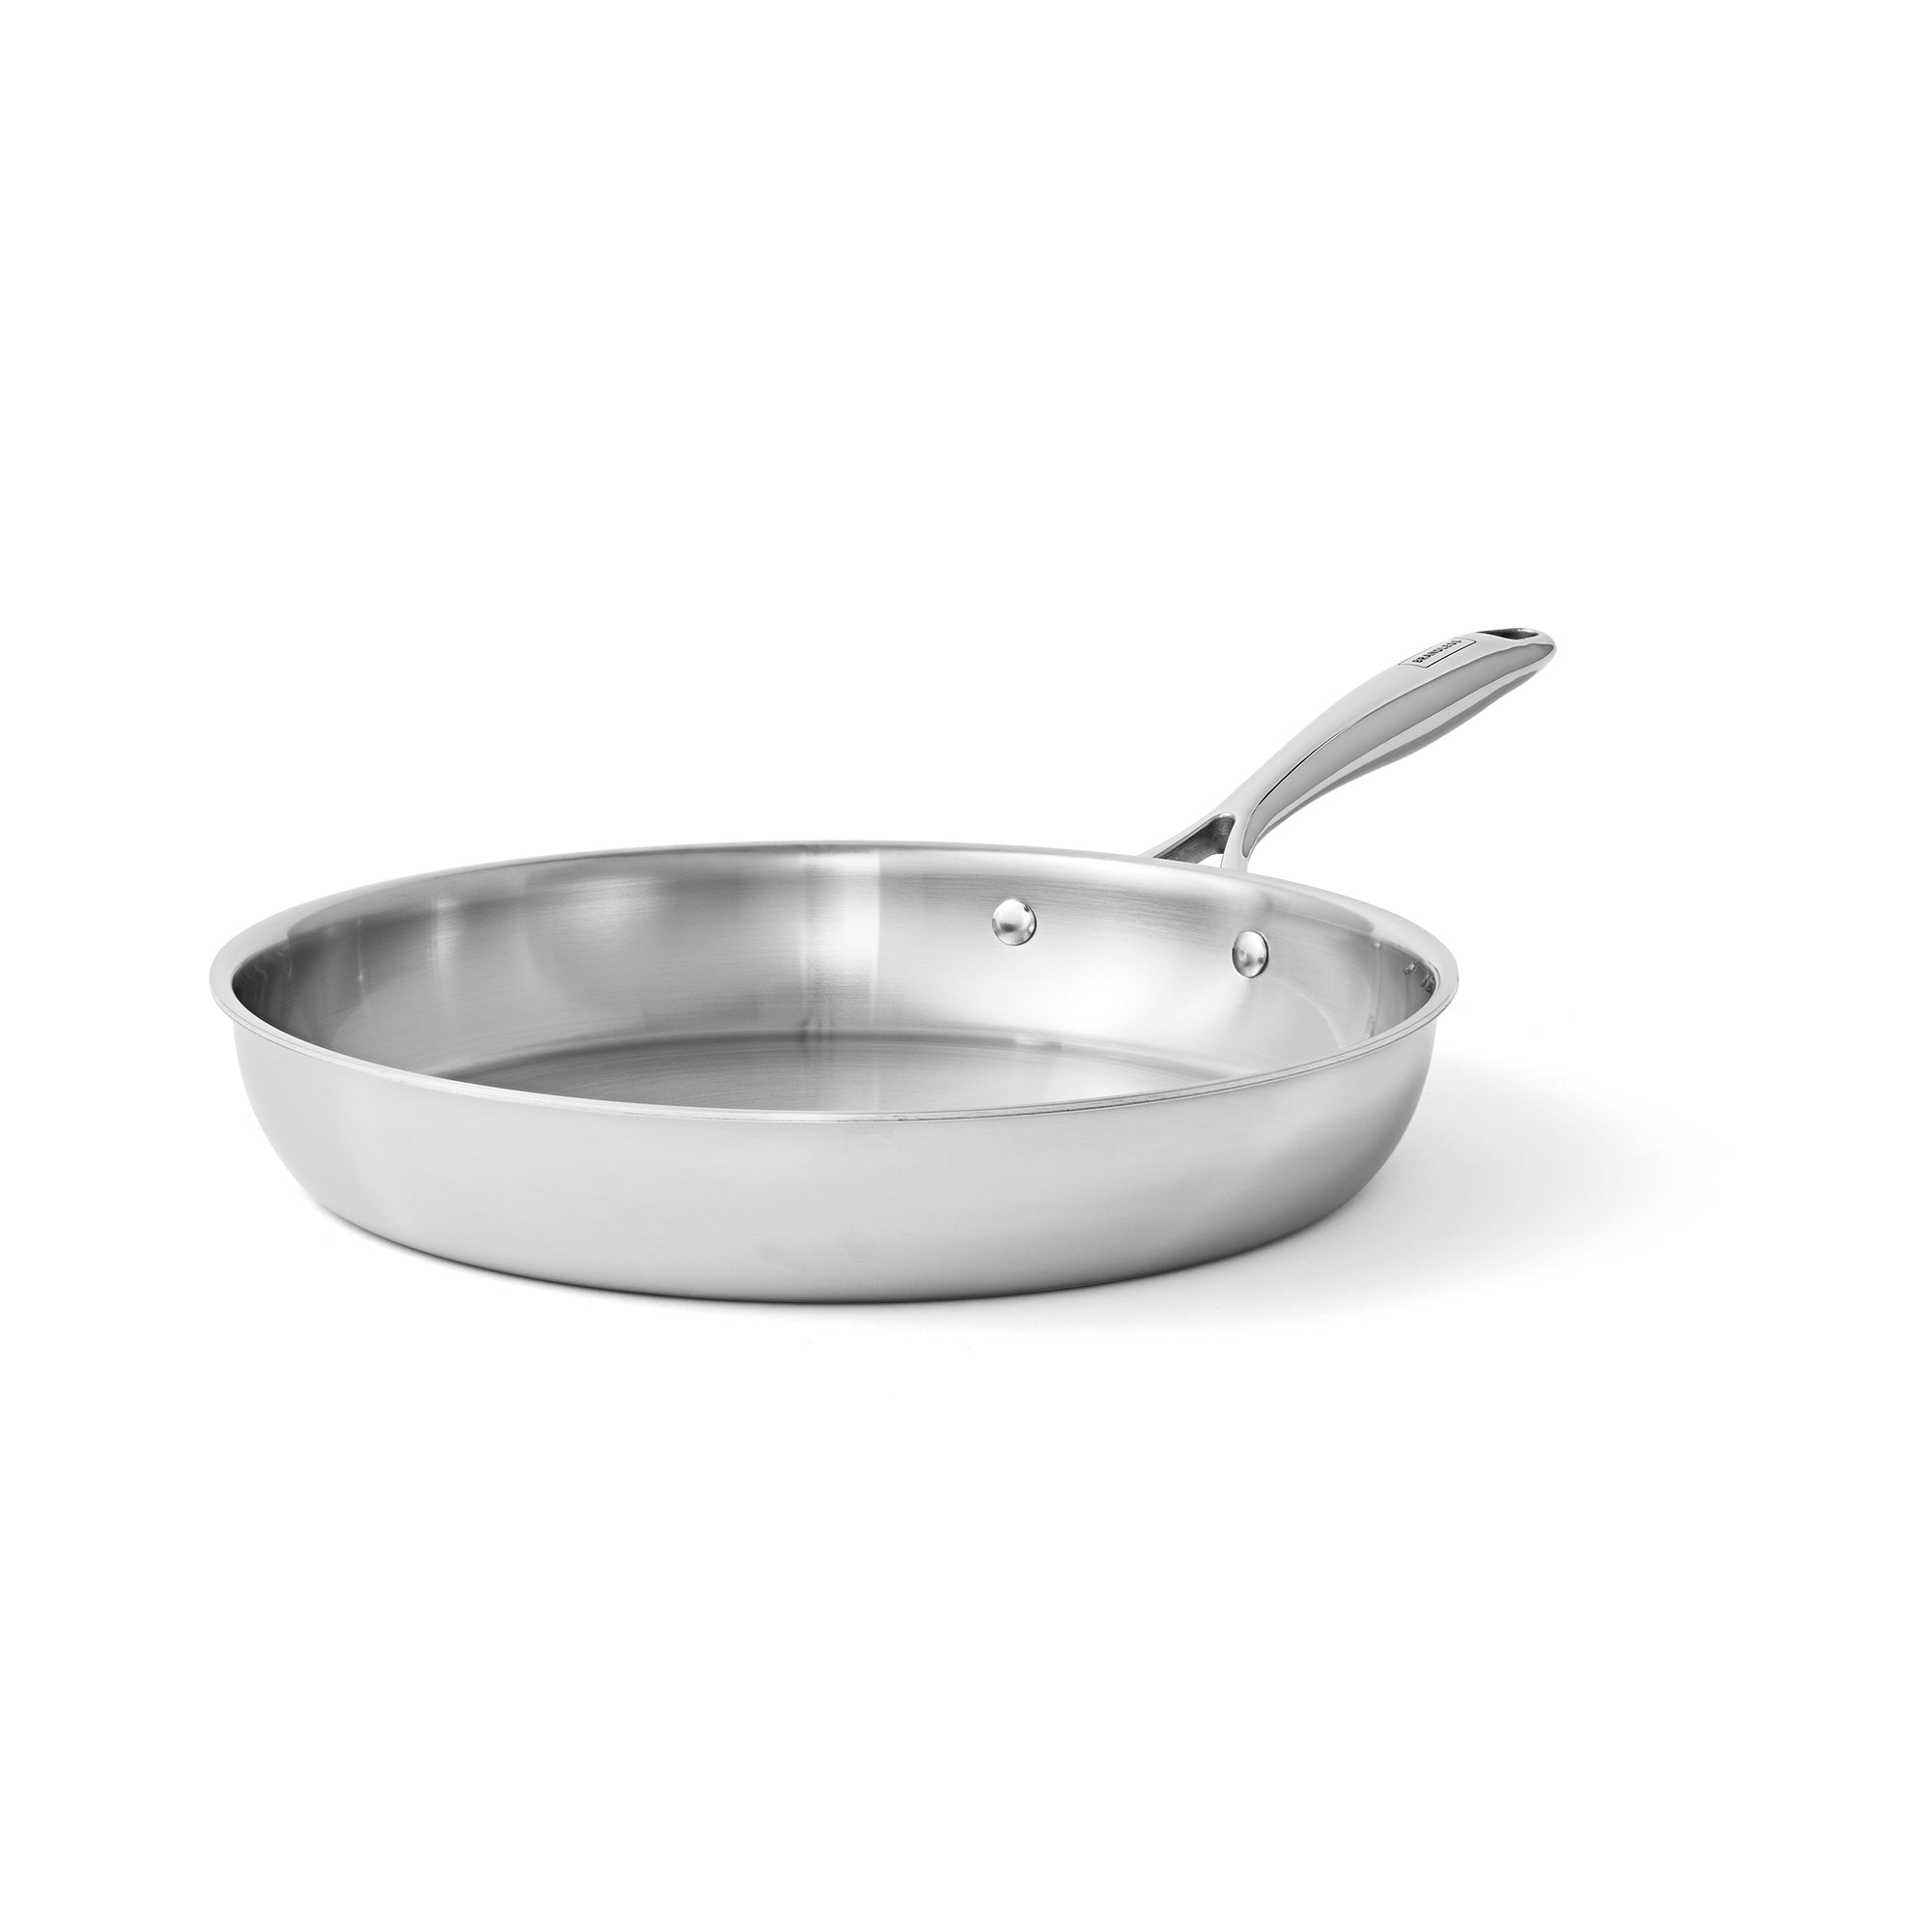 12-Inch Frying Pan with Lid